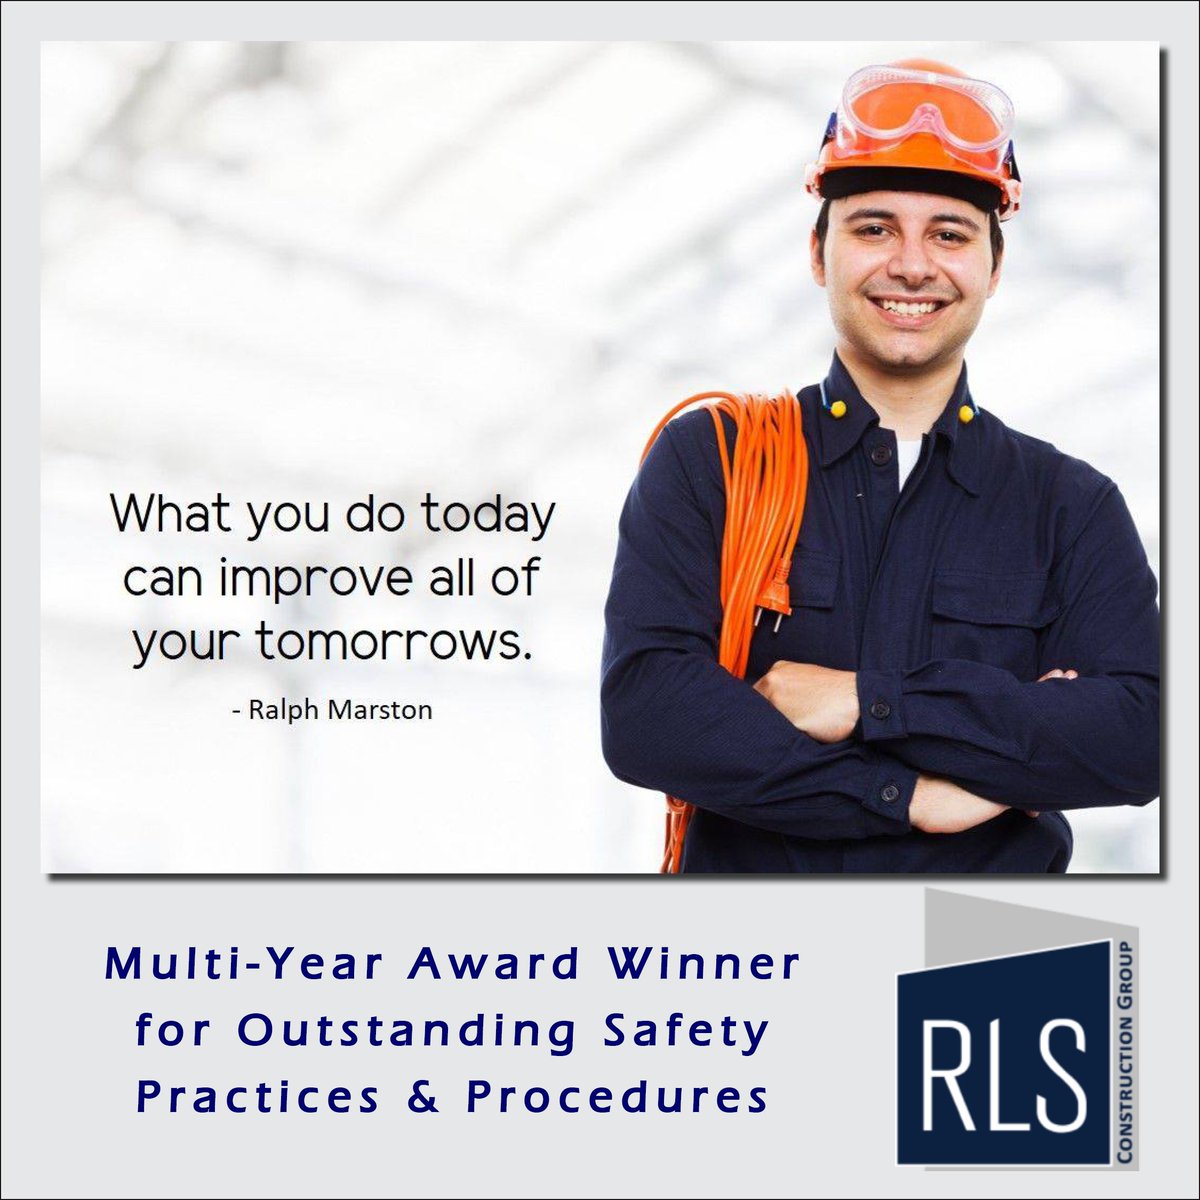 RLS uses continuing safety training and reviews of each job site to ensure everyone makes it home safely every day. Nothing is more important!

#SafetyFirst #GeneralContractor #ConstructionManagement #DesignBuild #NewConstruction #Renovation #Addition #BuildingMaintenance #SDVOSB